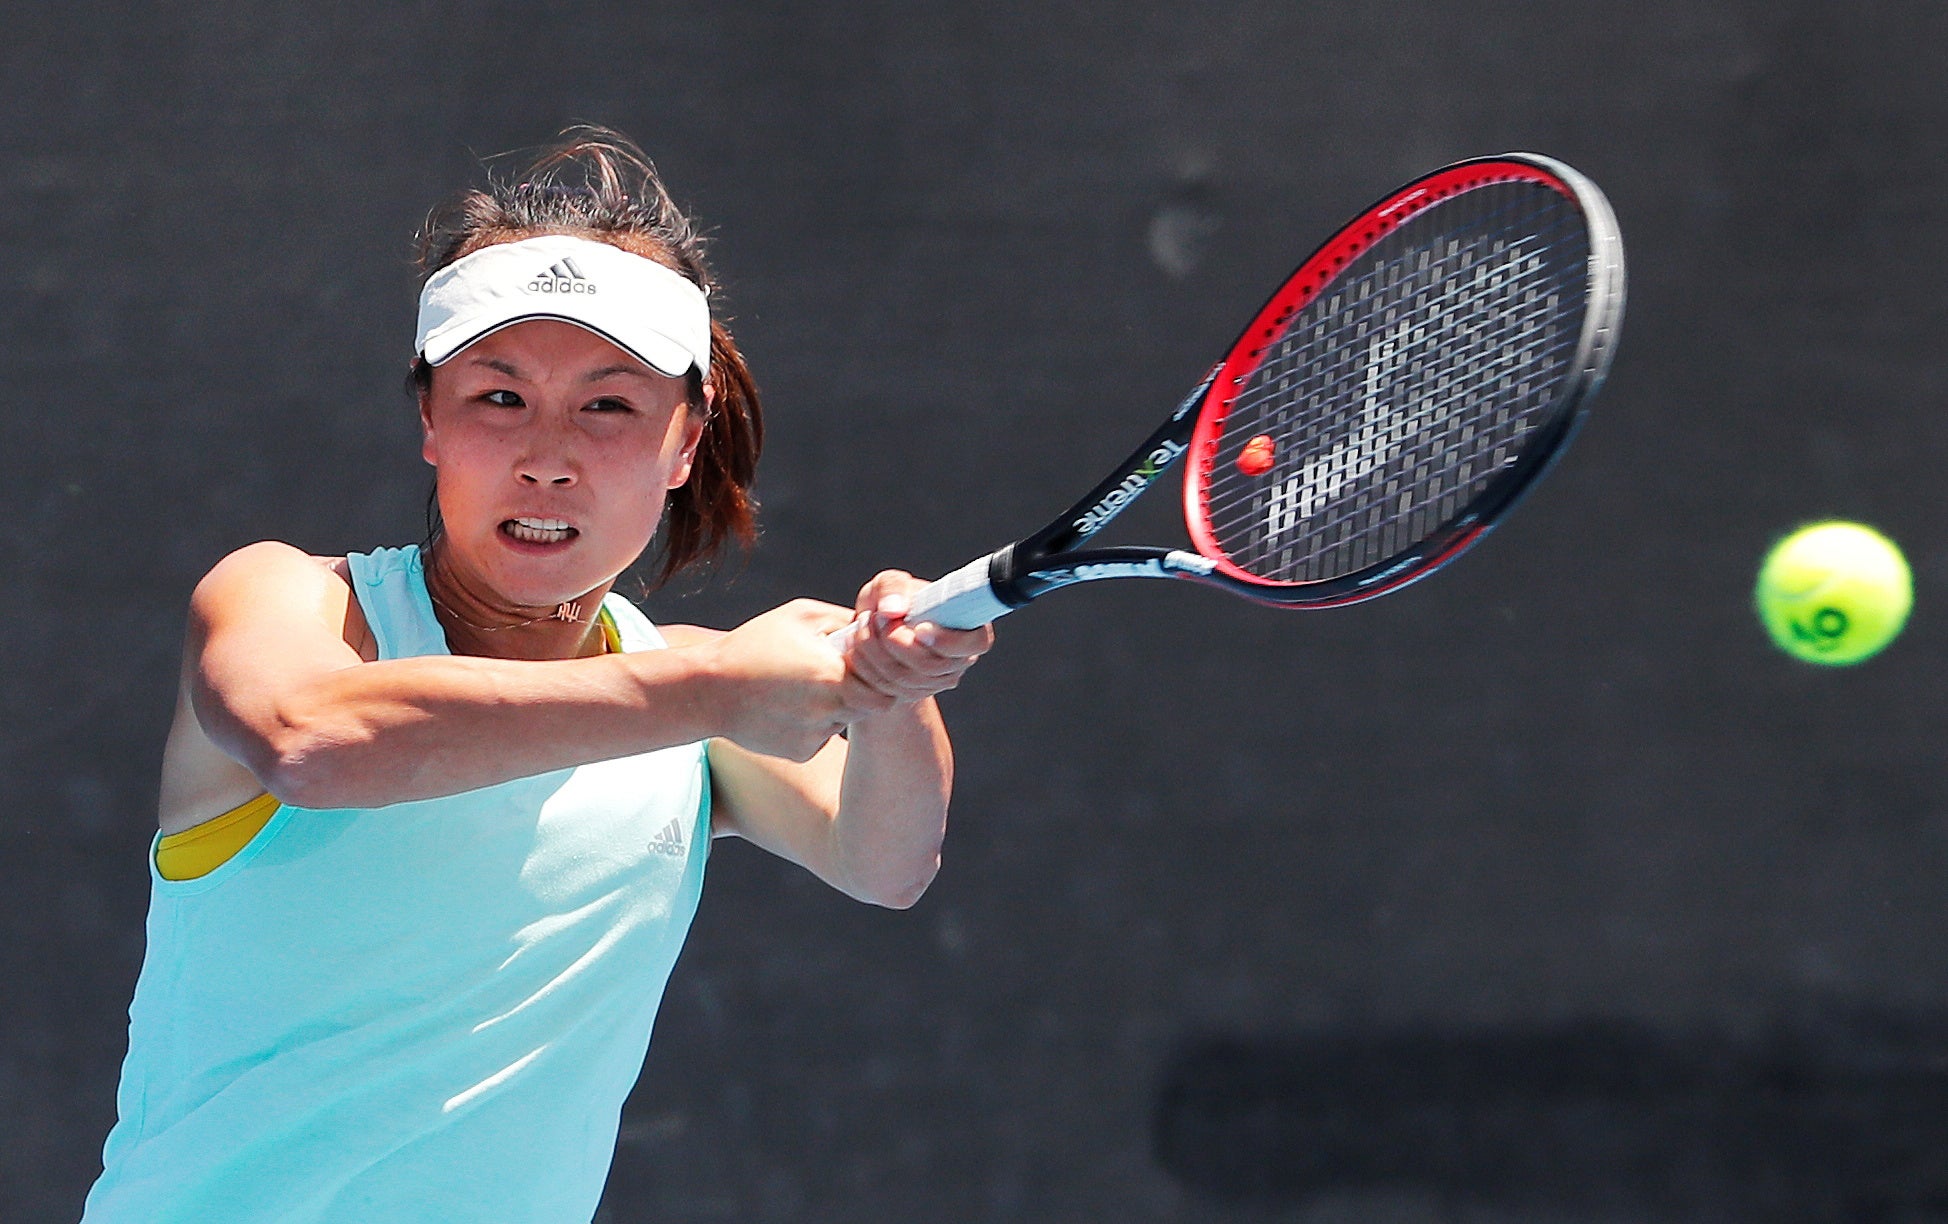 Peng Shuai has hit a nerve at China’s highest level of power